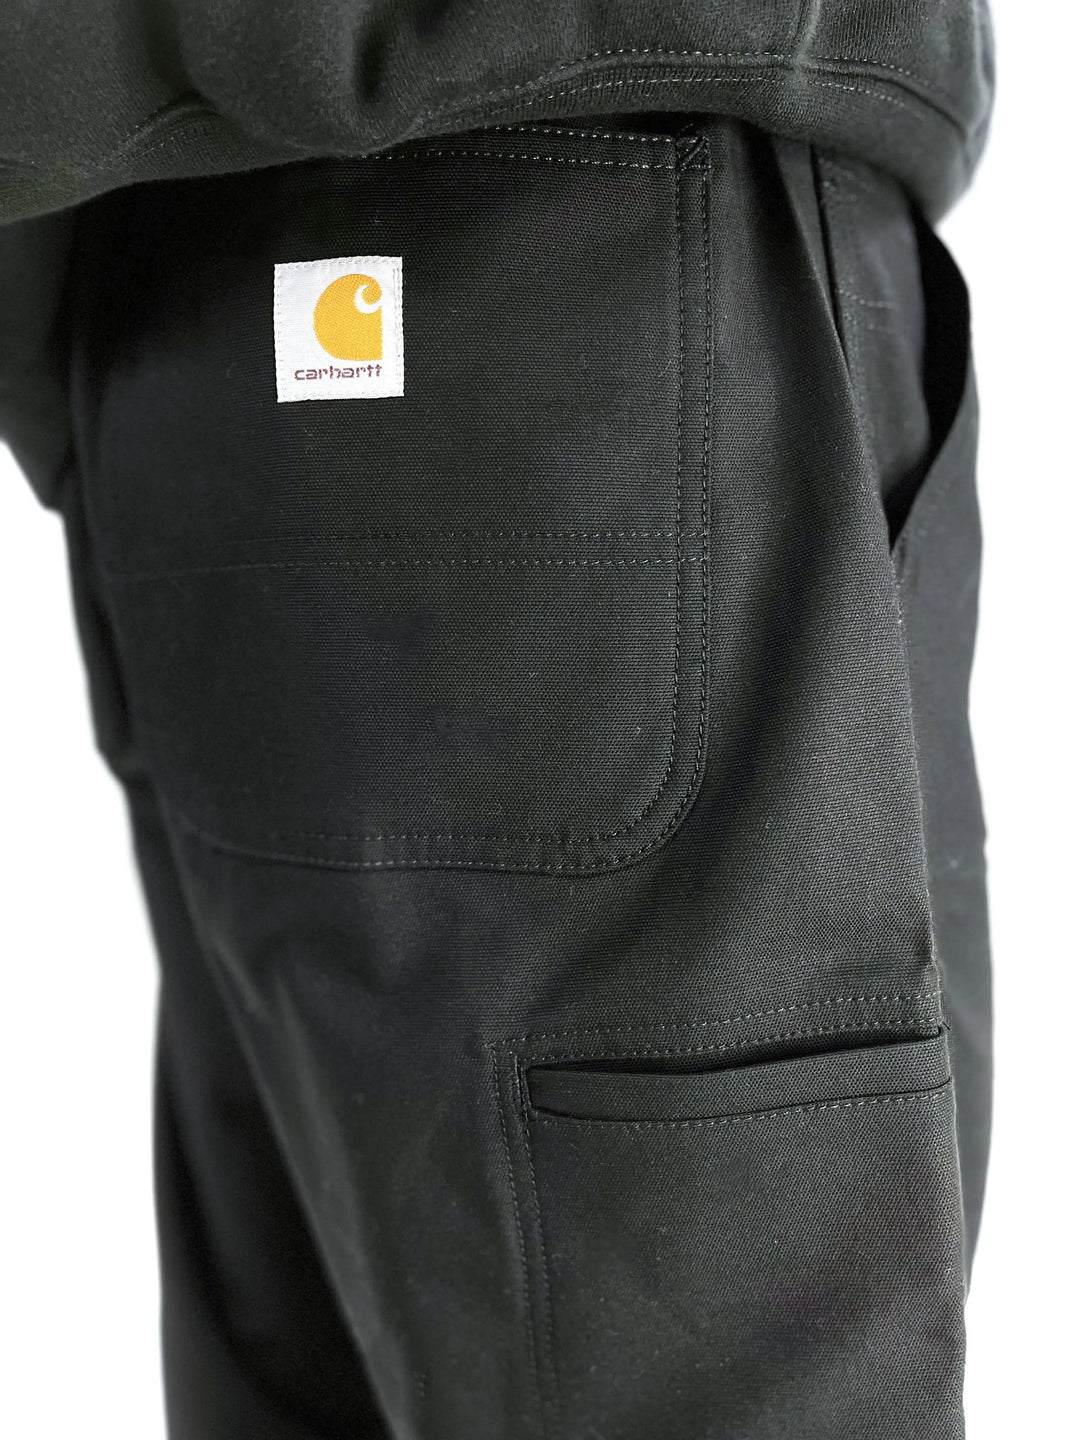 Carhartt Professional Series Relaxed Fit Pant Black Prior